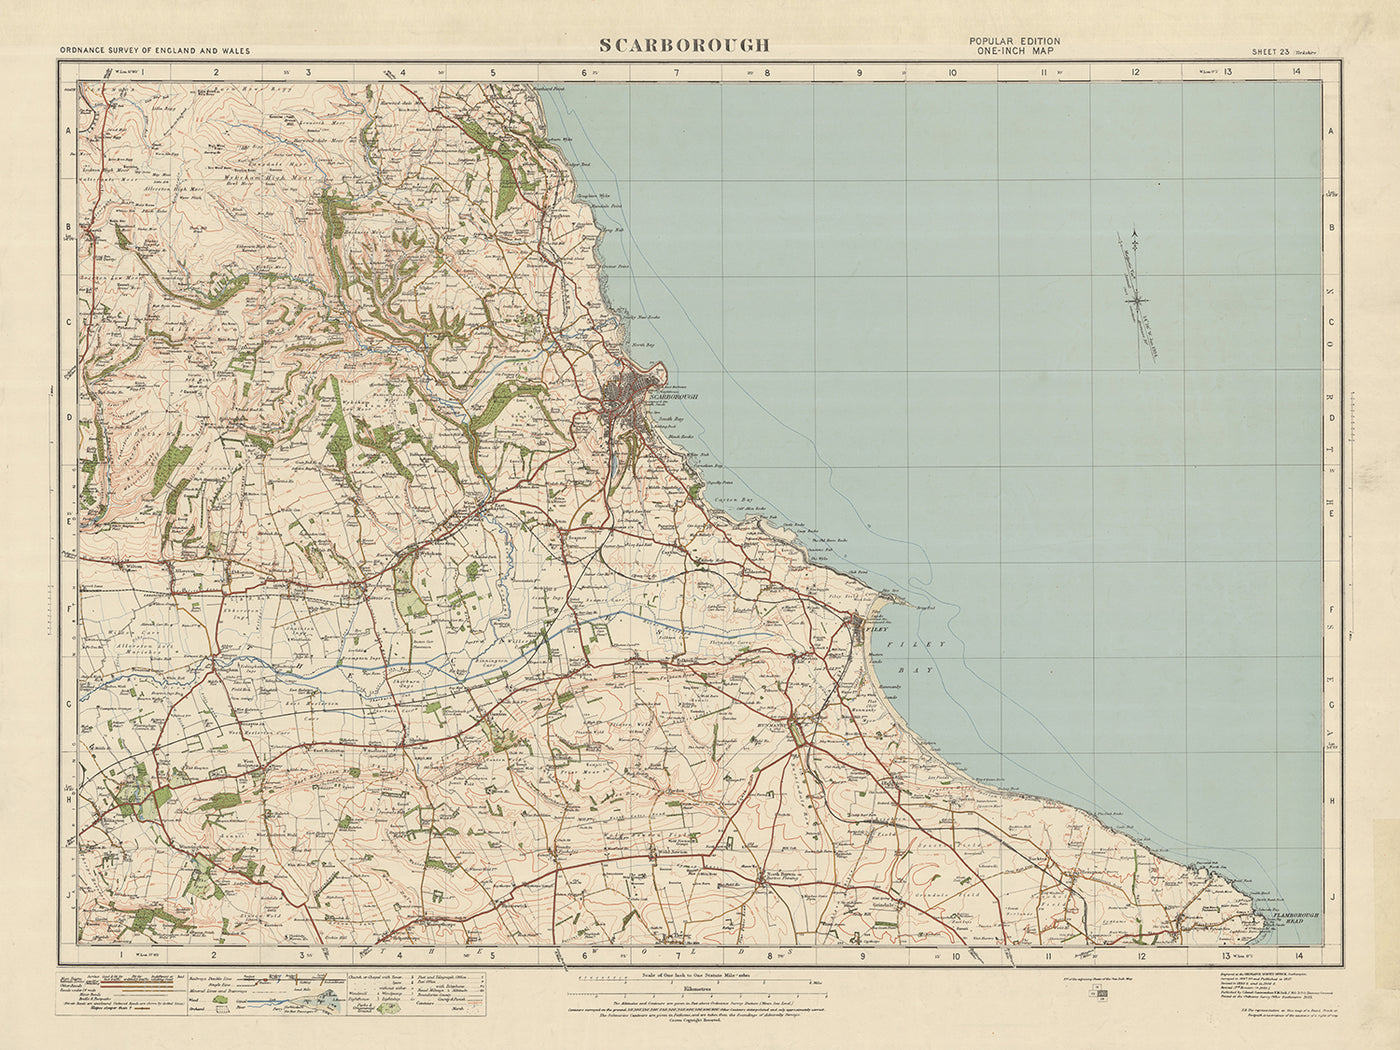 Old Ordnance Survey Map, Sheet 23 - Scarborough, 1925: Filey, Hunmanby, Sherburn, North Riding Forest Park, Flamborough Outer Headlands Nature Reserve